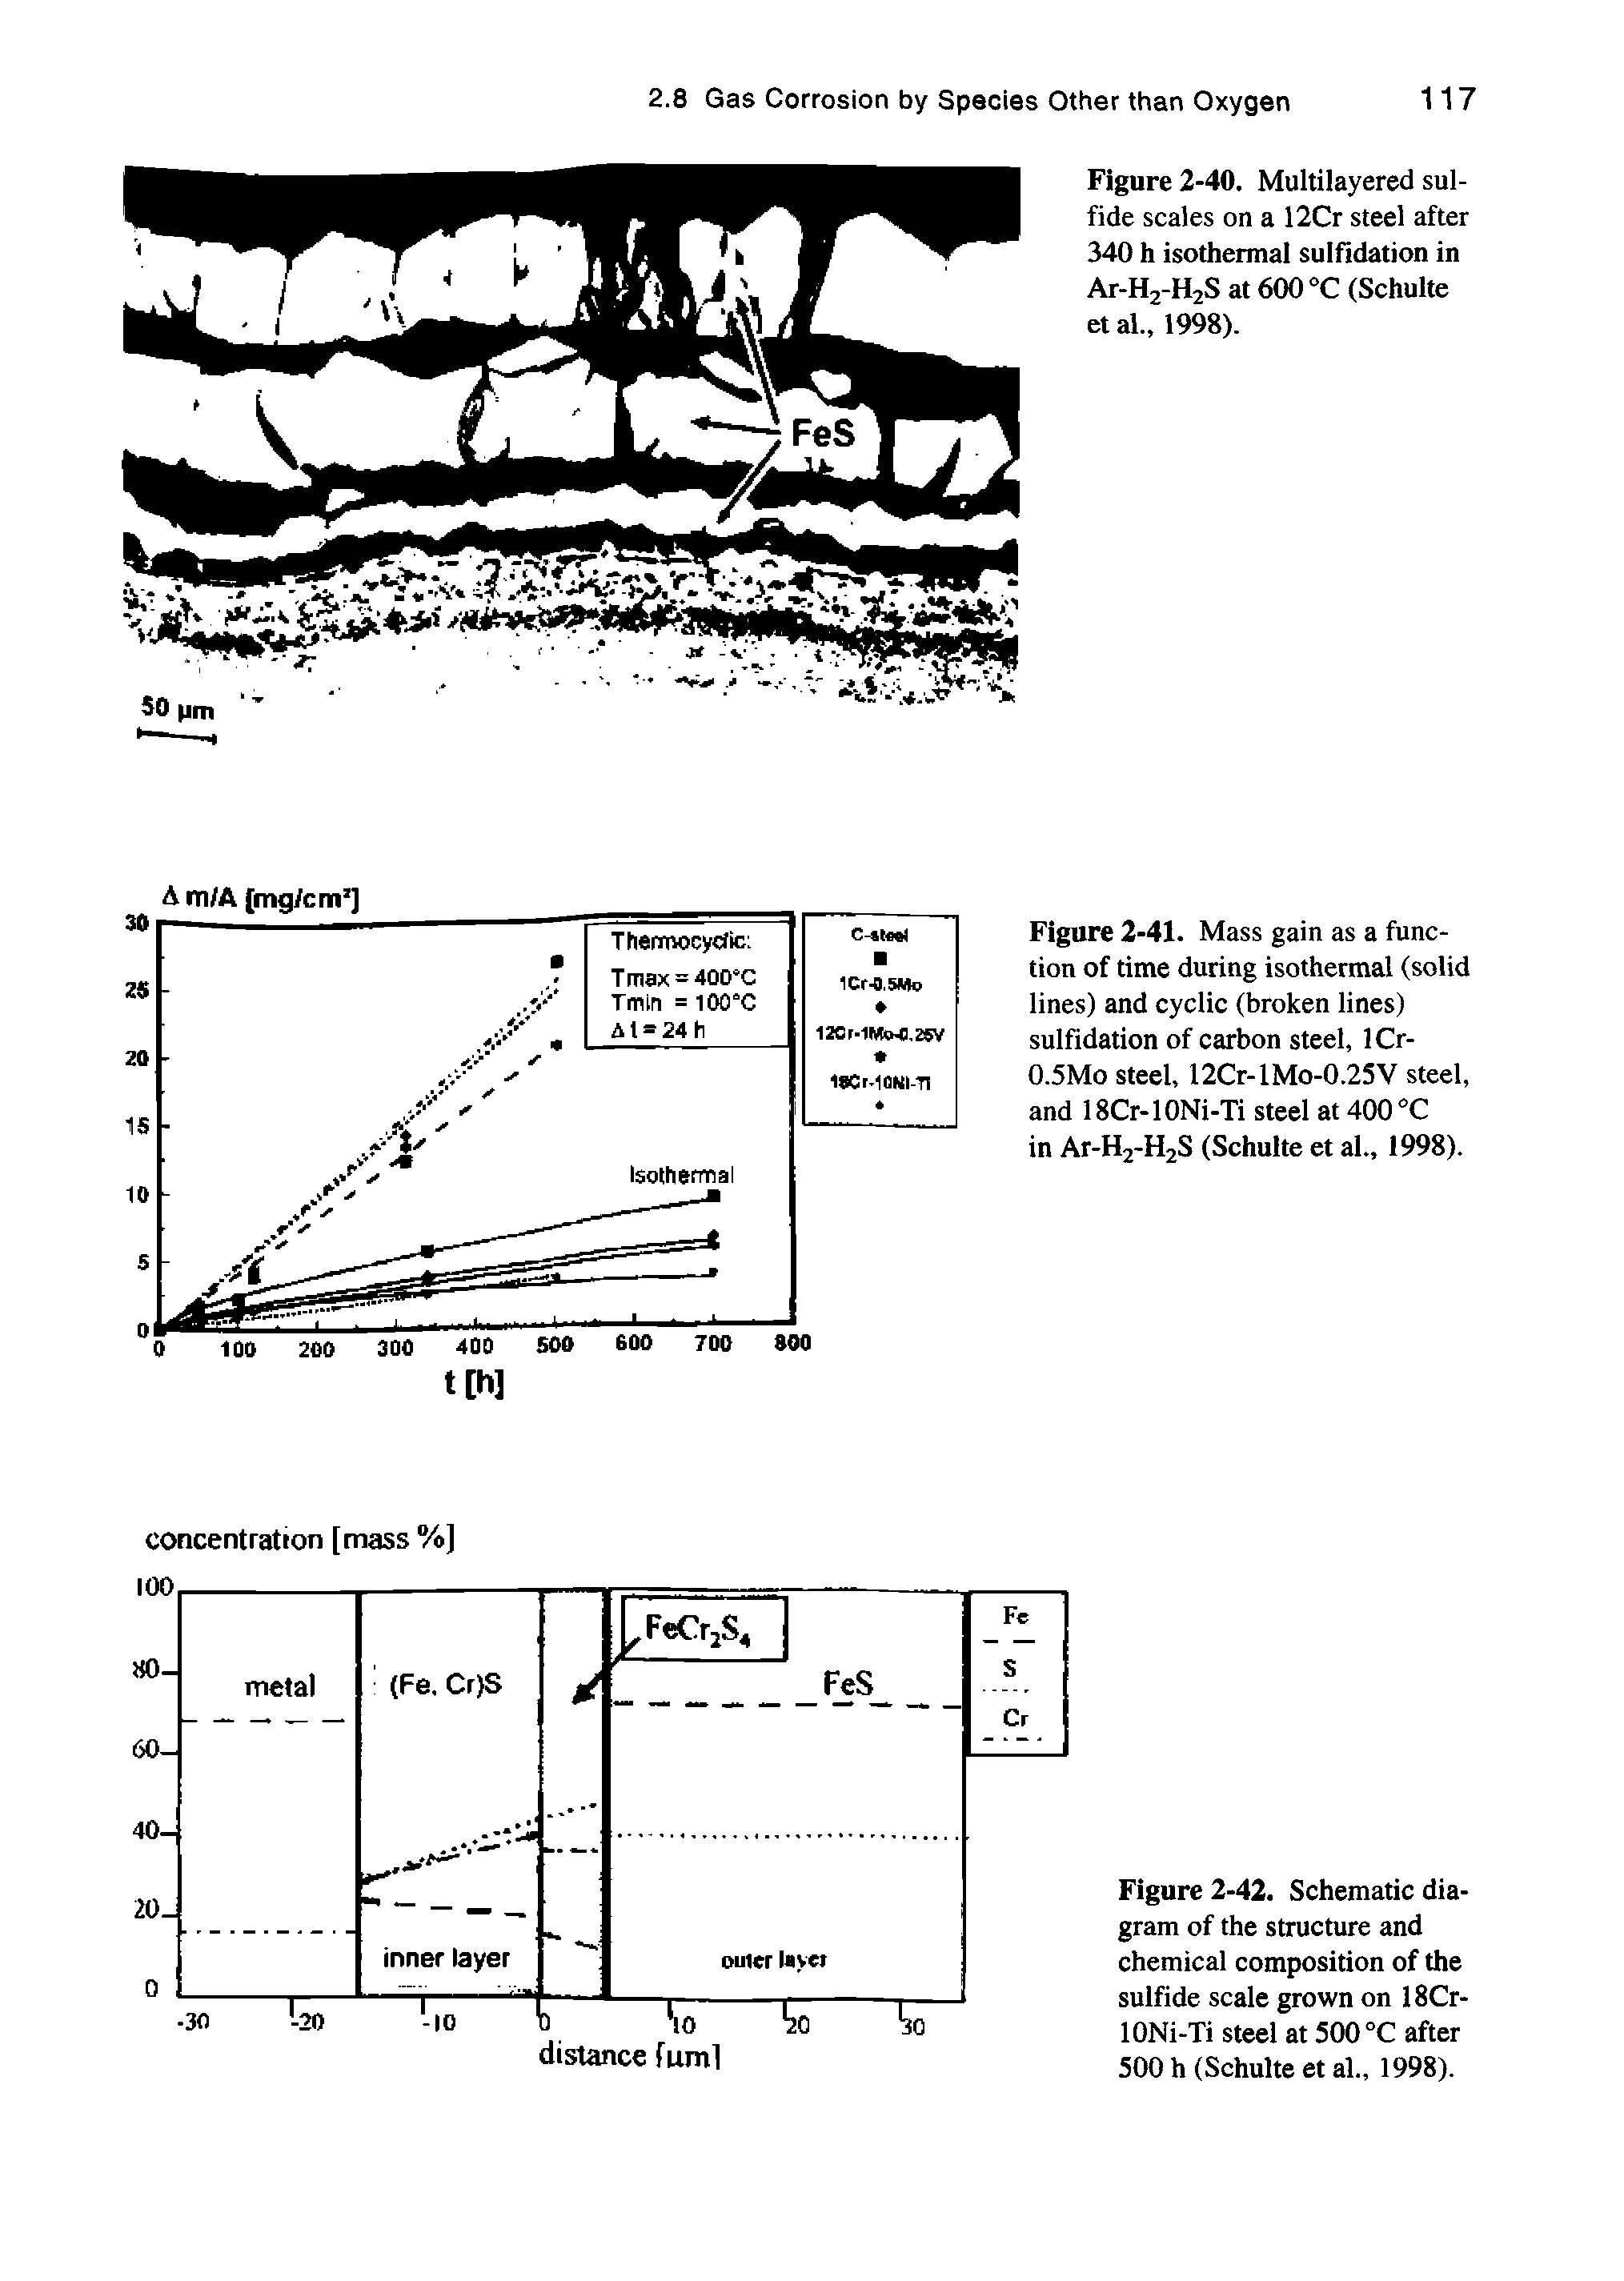 Figure 2-42. Schematic diagram of the structure and chemical composition of the sulfide scale grown on 18Cr-lONi-Ti steel at 500 °C after 500 h (Schulte etal., 1998).